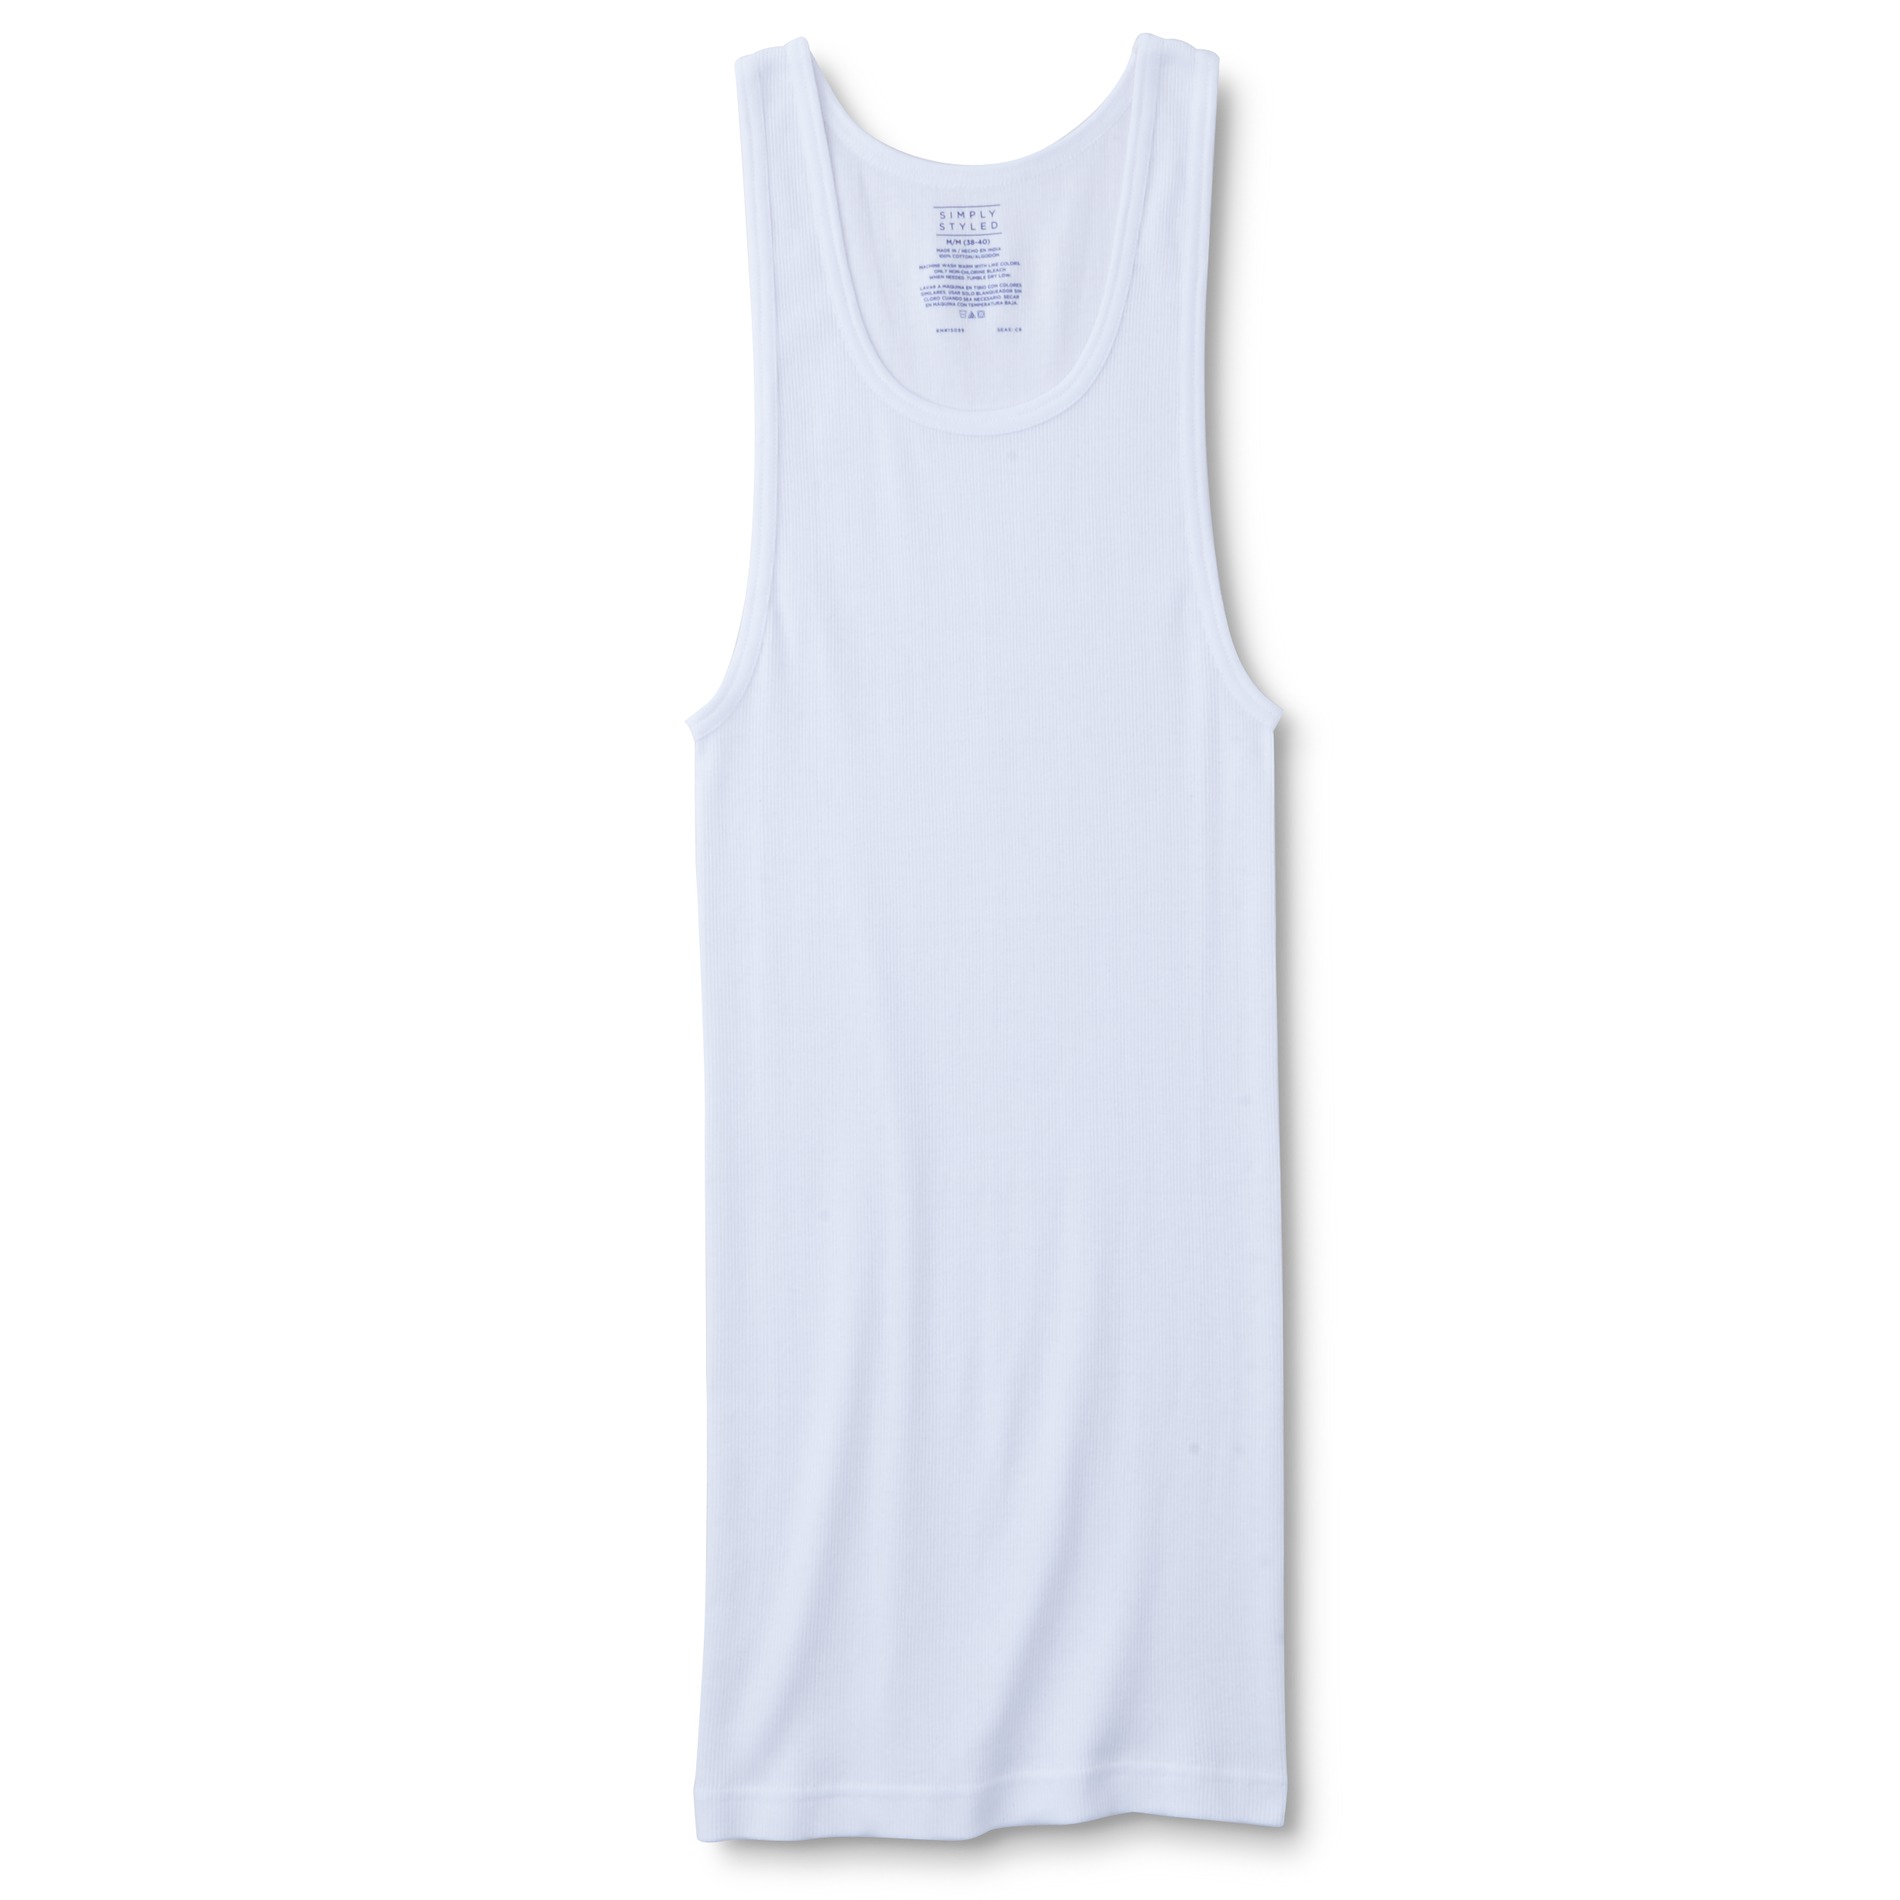 Simply Styled Men's 3-Pack Tank Tops